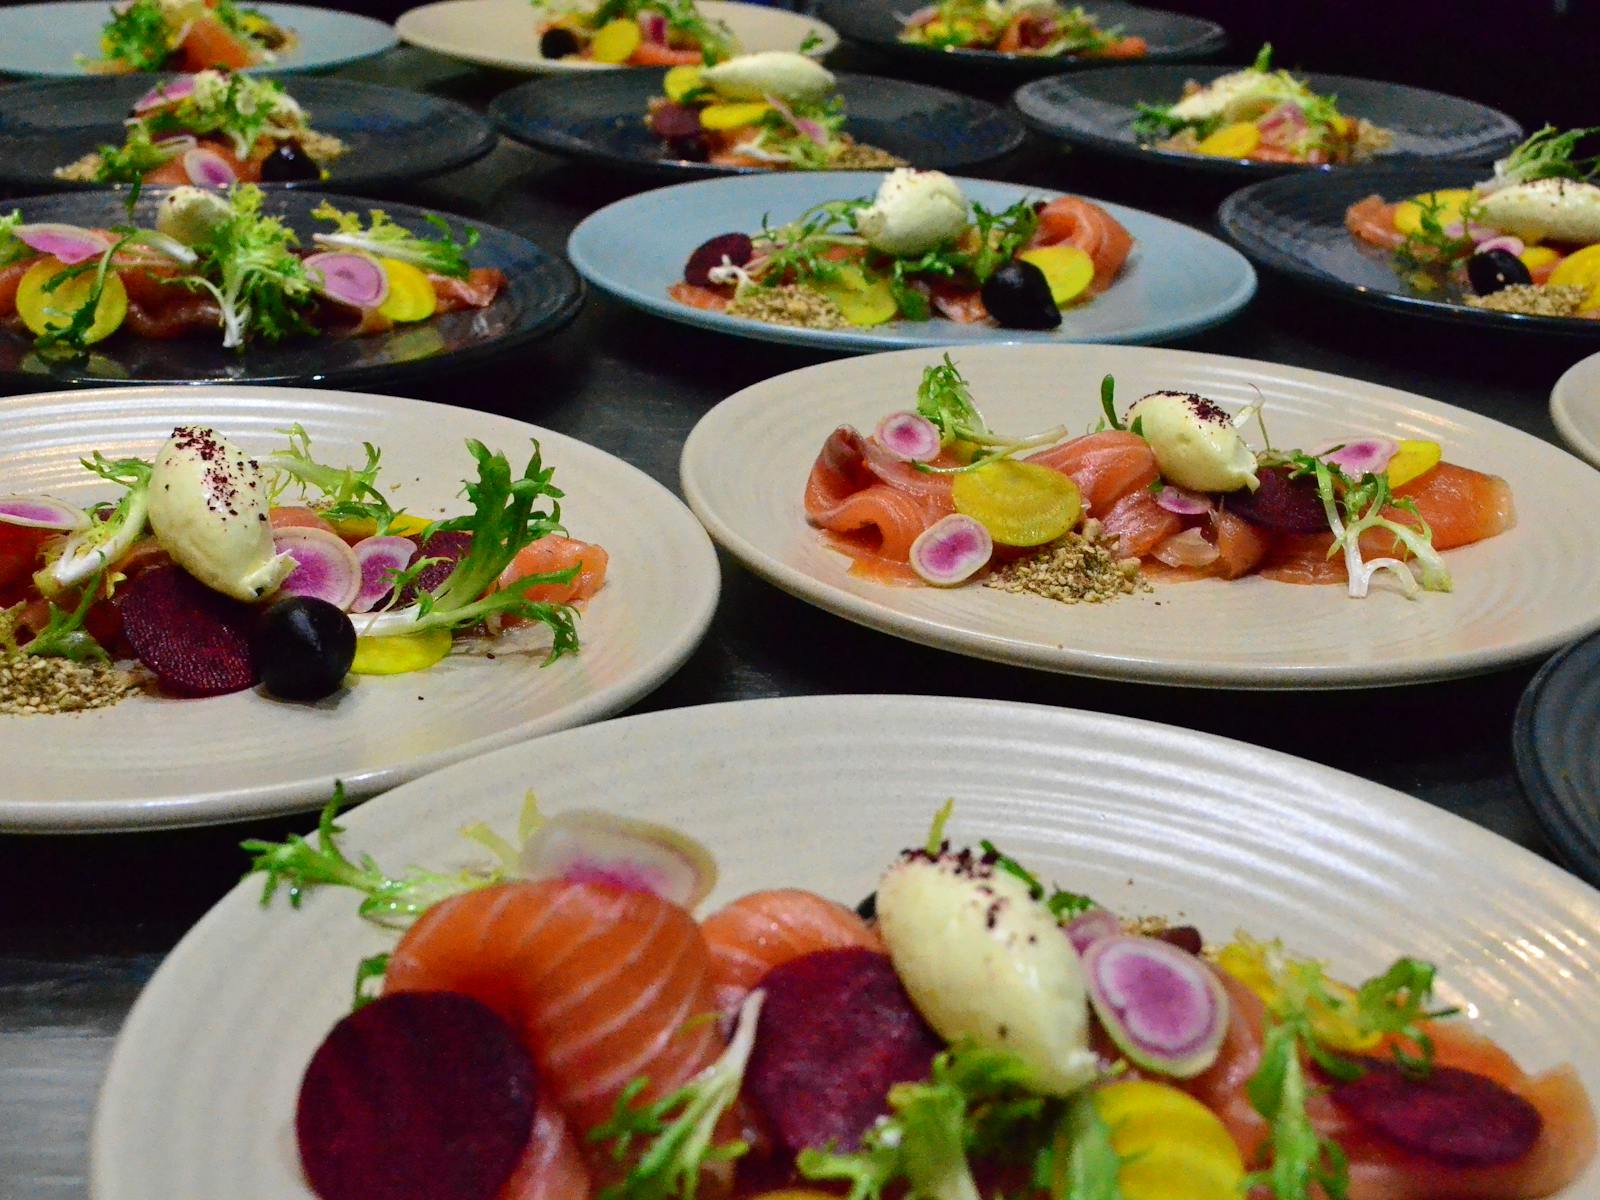 Timboon Vodka infused Smoked Salmon with beets